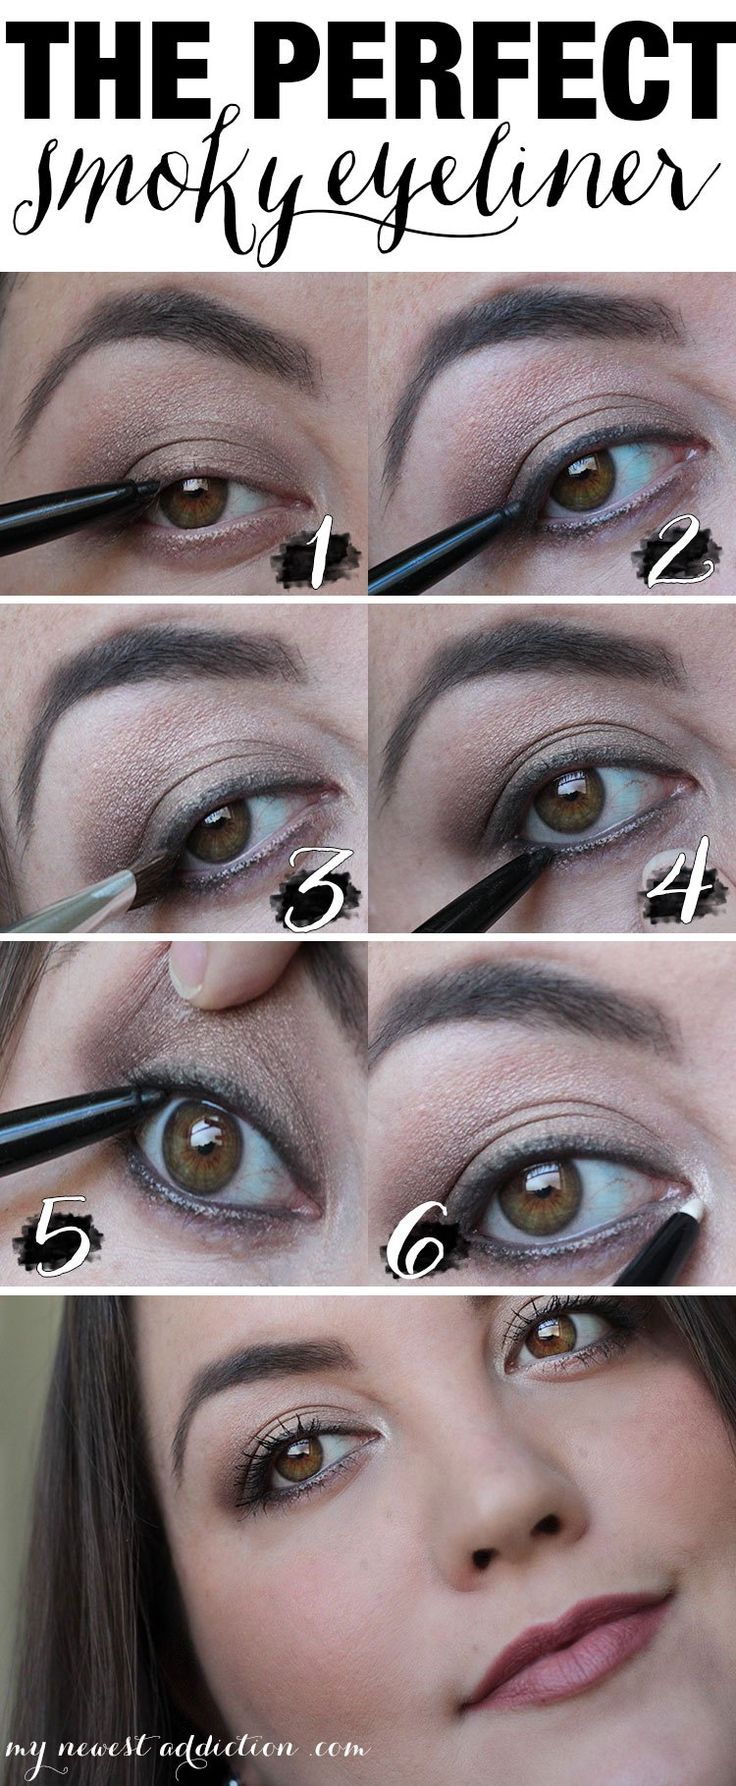 The Perfect Smoky Eyeliner.